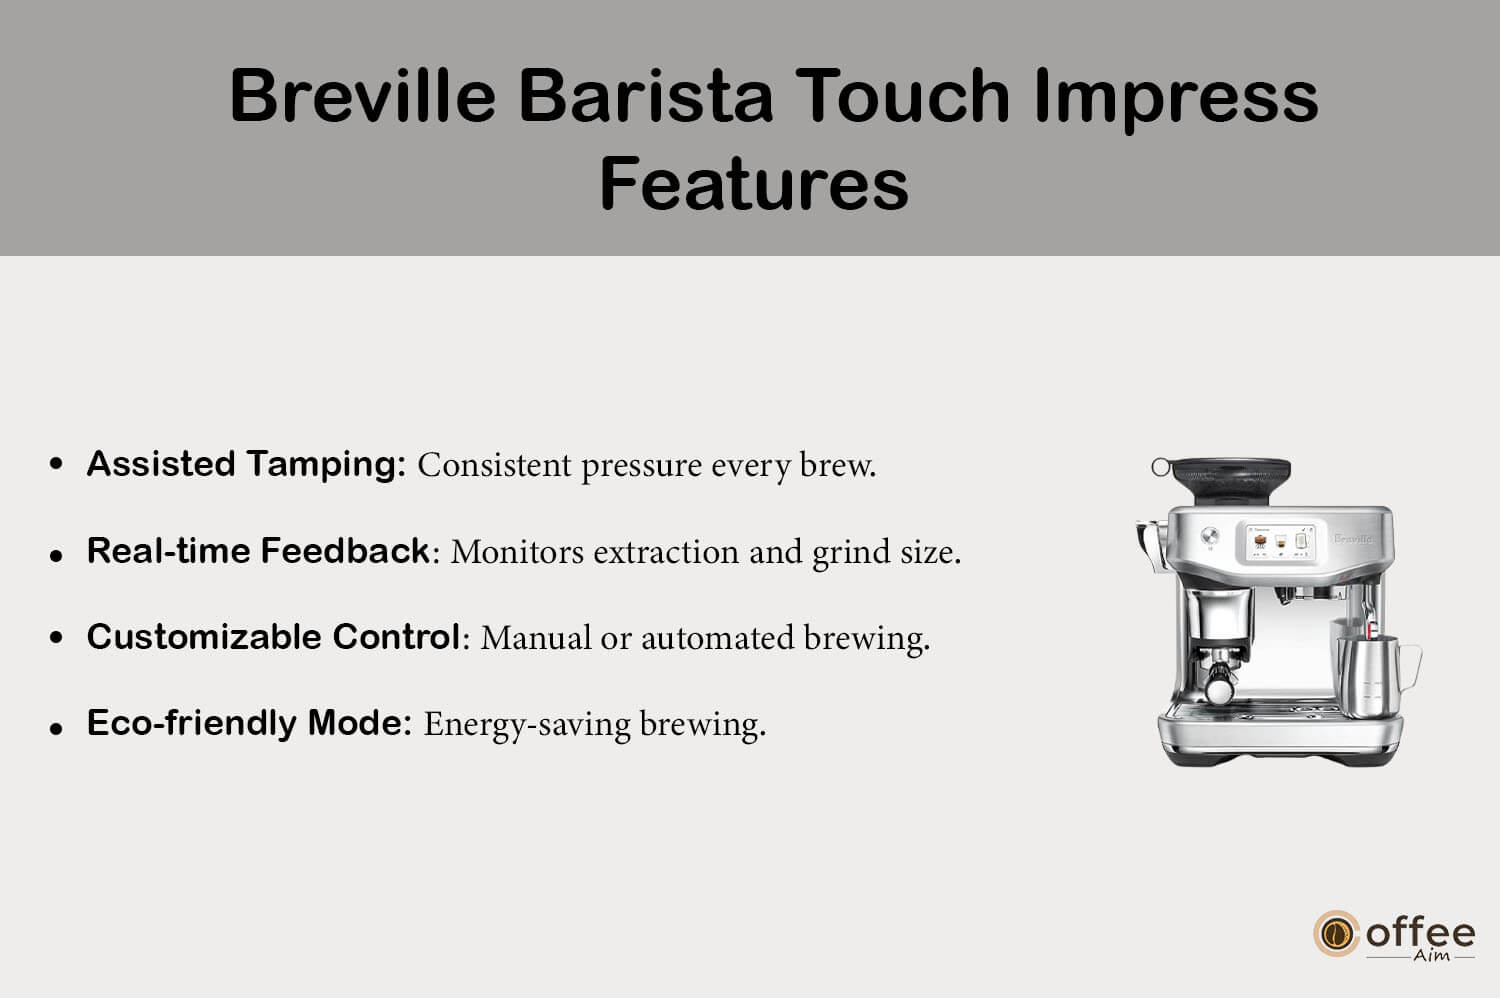 "This graphic showcases the key features of the 'Breville Barista Touch Impress', as highlighted in our comprehensive 'Breville Barista Touch Impress Review' article."